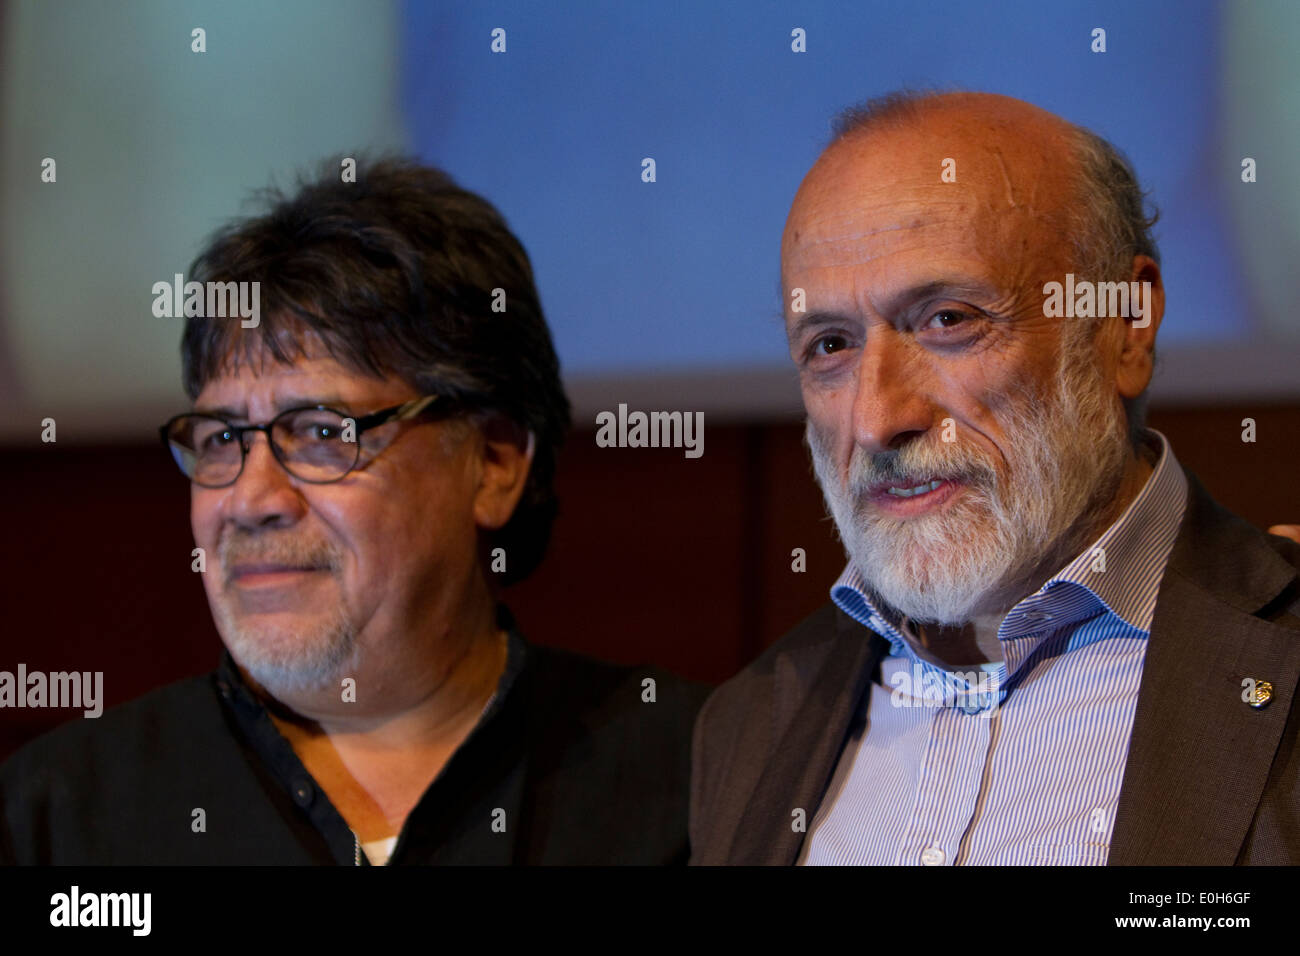 Writer Luis Sepulveda (left) and Slow Food movement founder Carlo Petrini (right) during a conference at Torino Book Fair Stock Photo